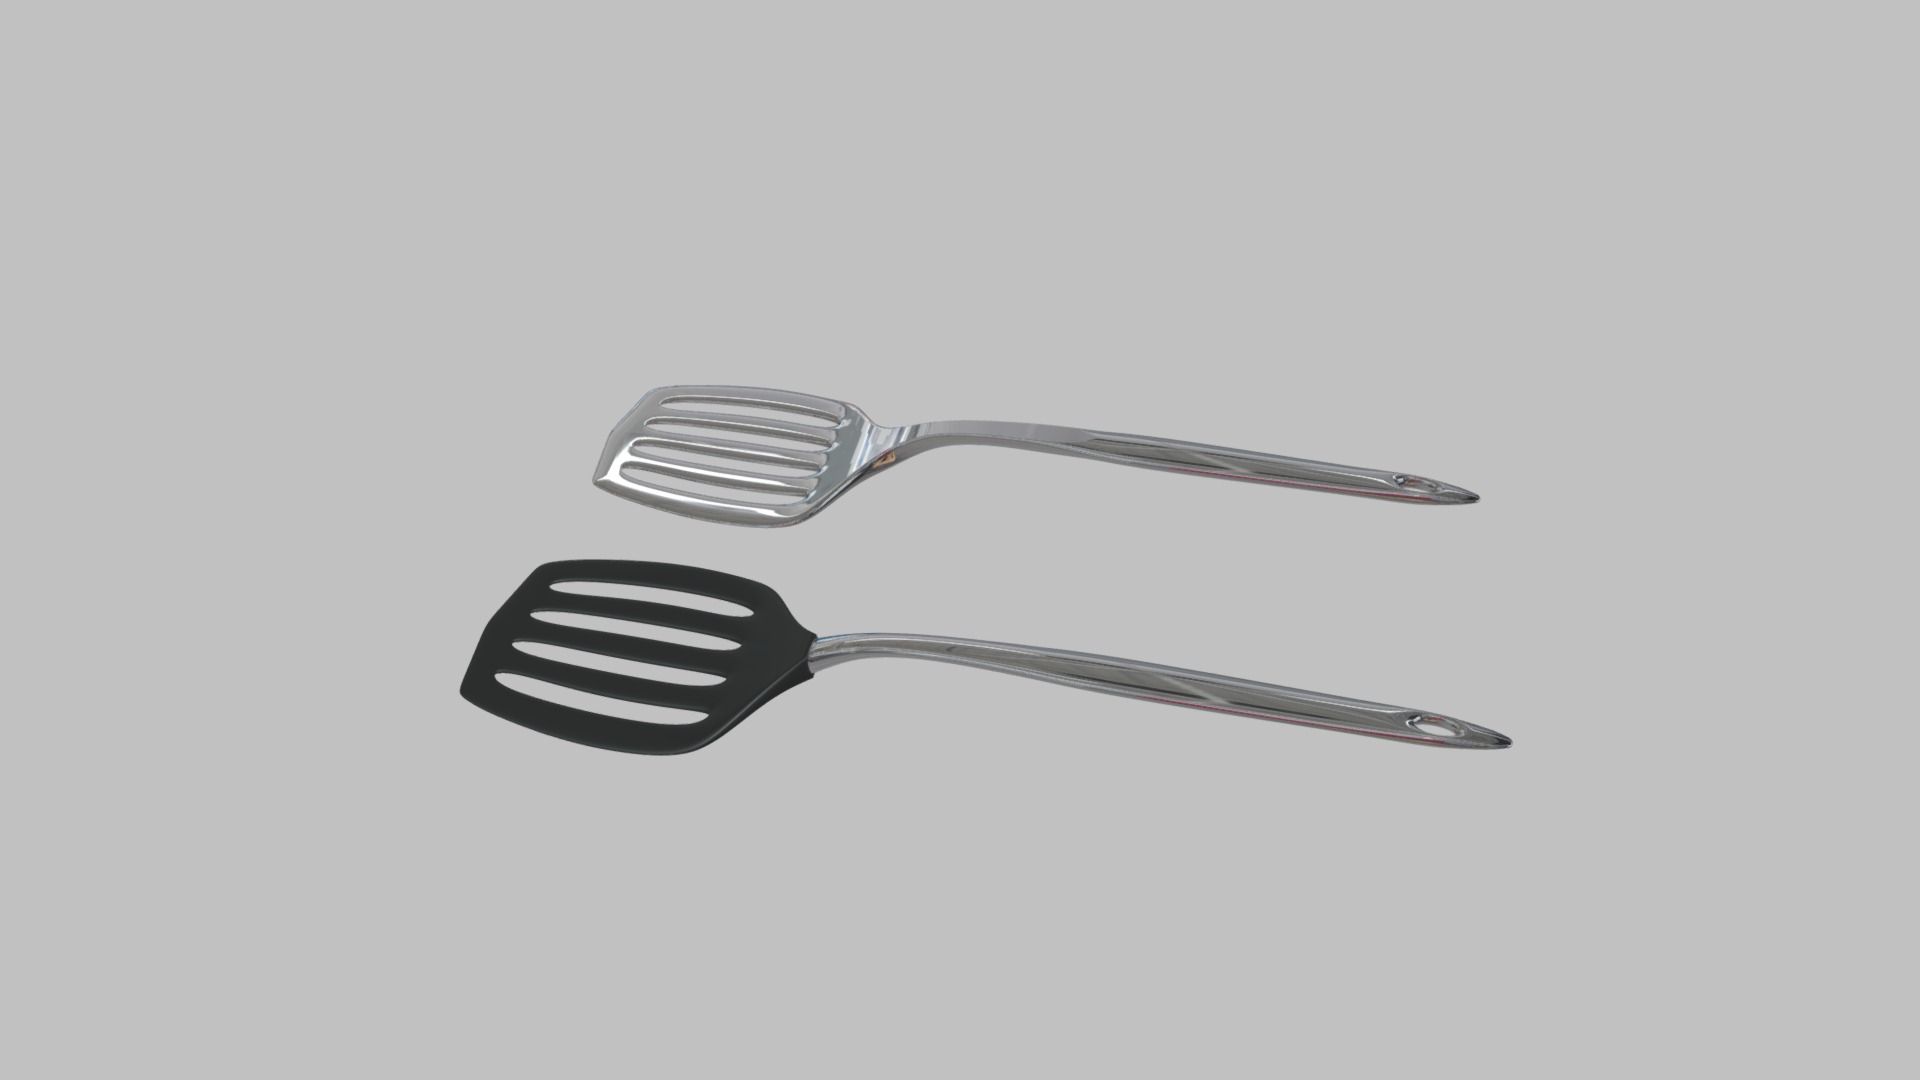 3D model Metallic and plastic Spatulas - This is a 3D model of the Metallic and plastic Spatulas. The 3D model is about a silver fork with a black handle.